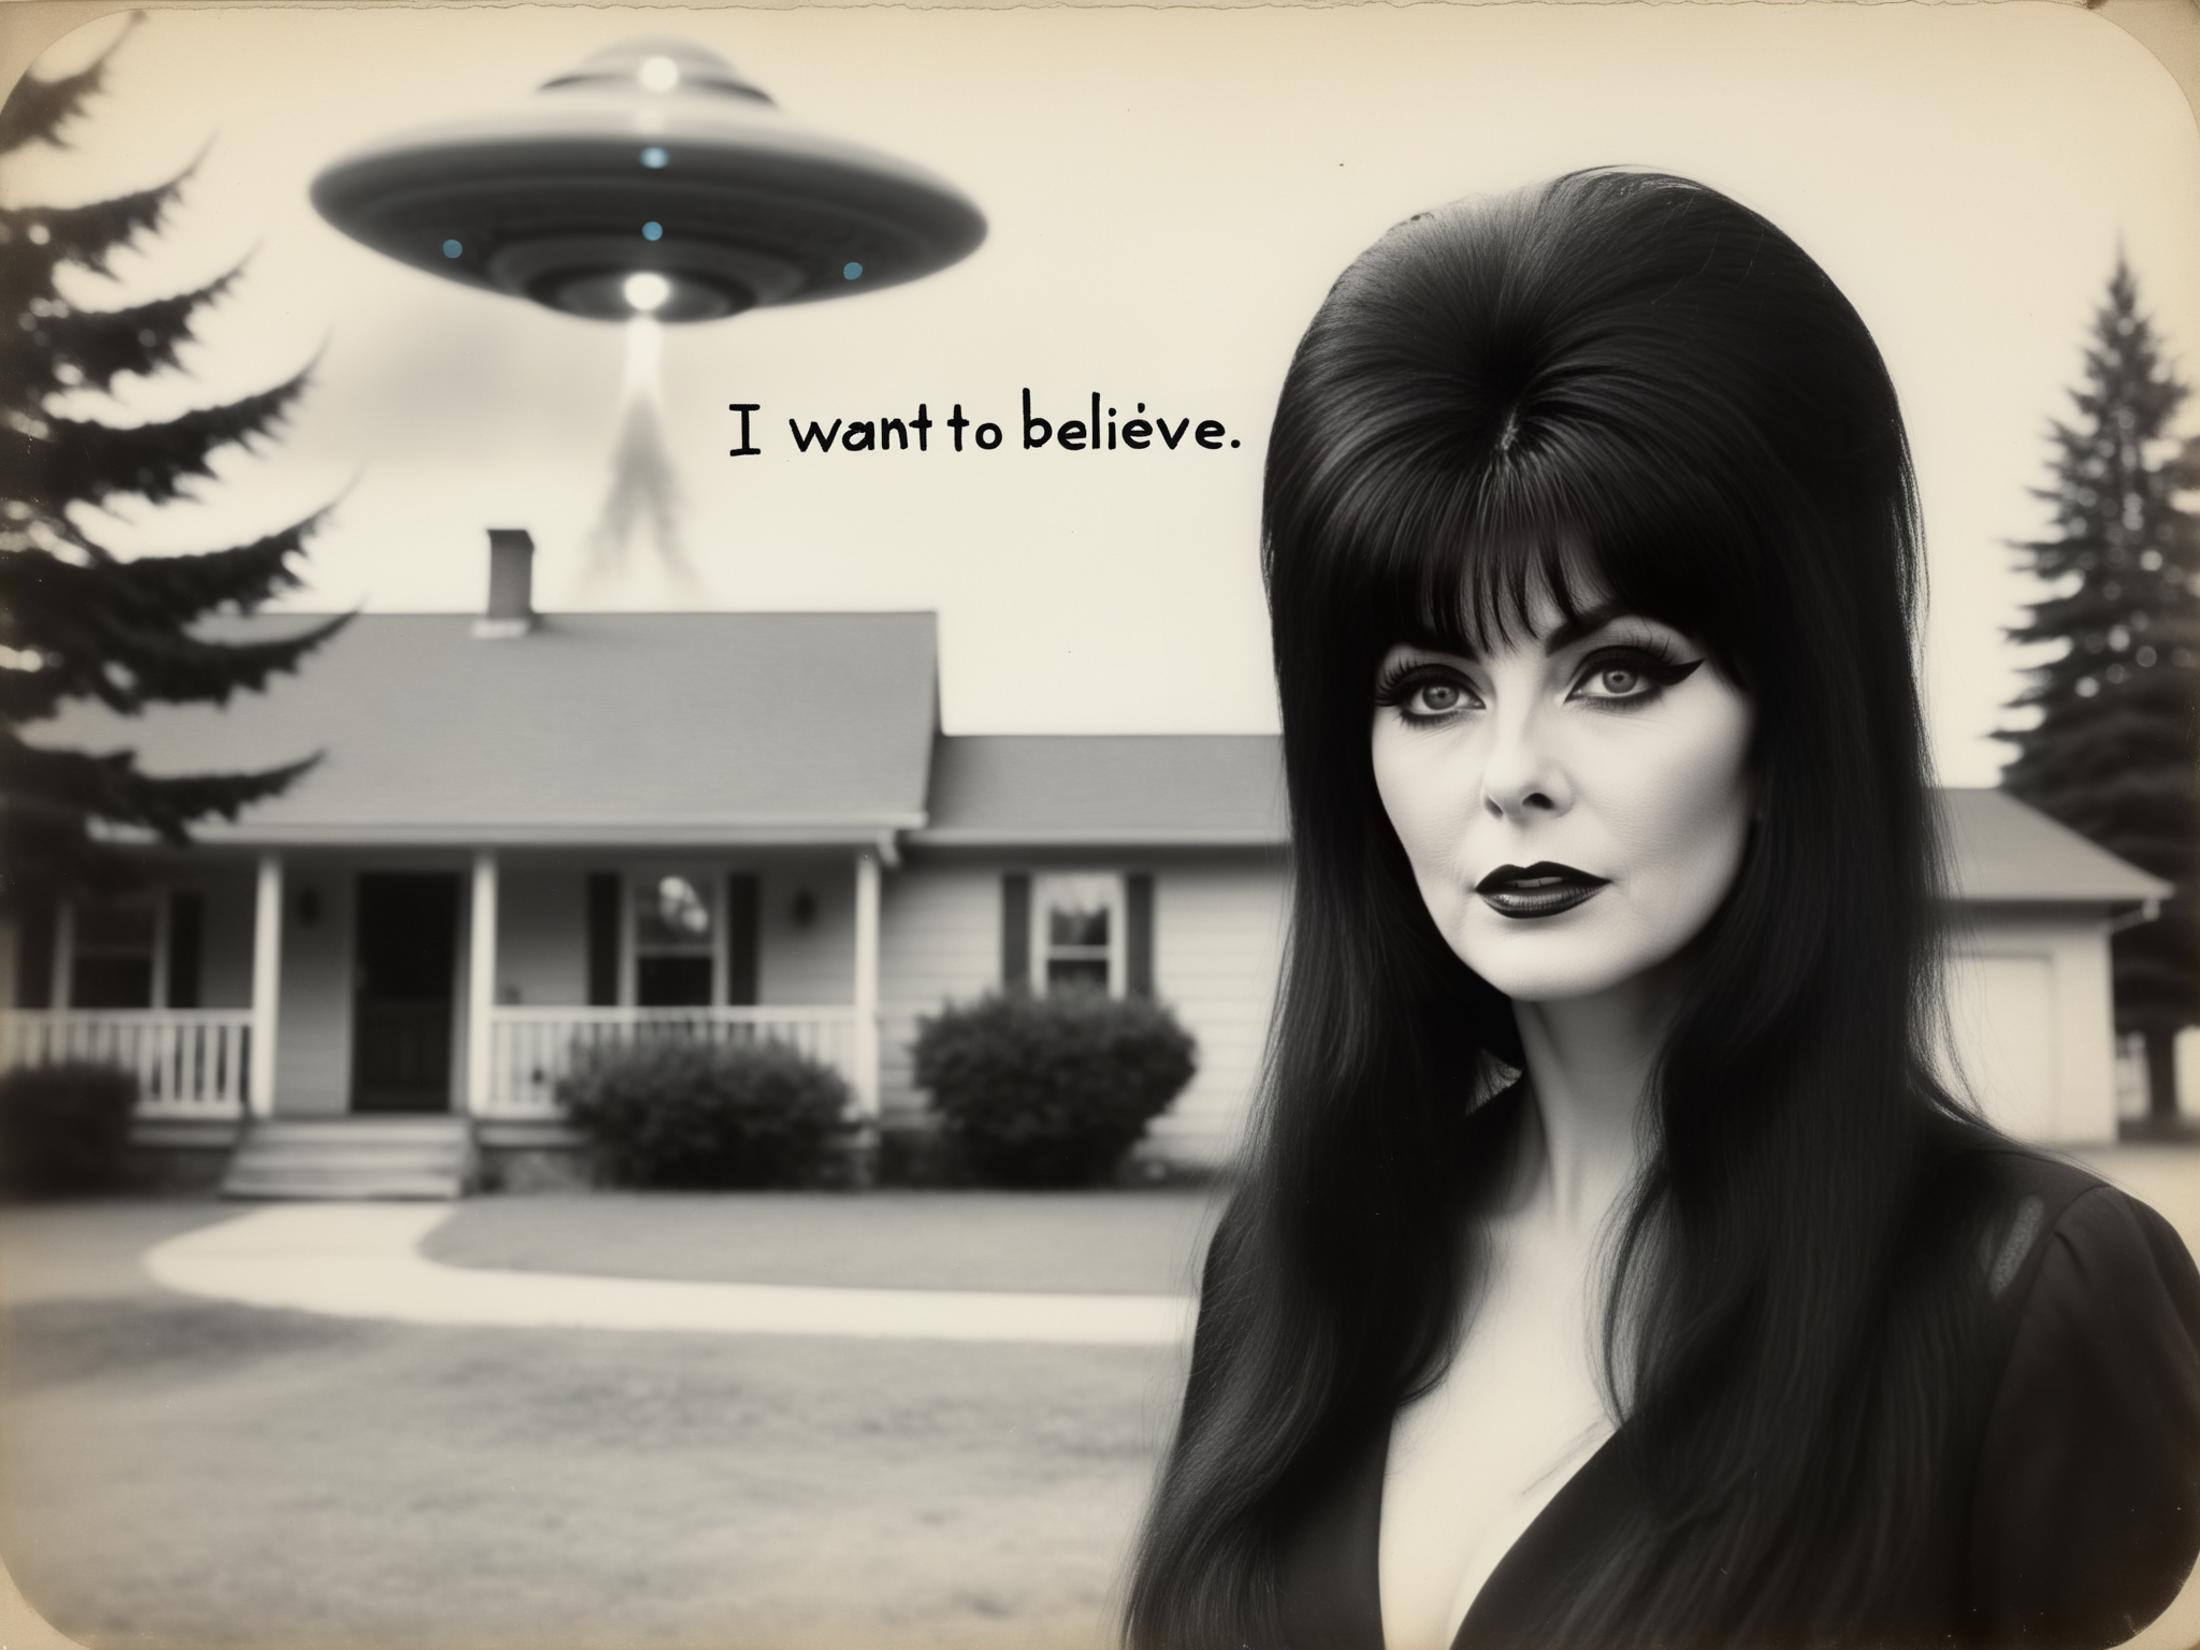 A woman with long hair and "I want to believe" written on the image.